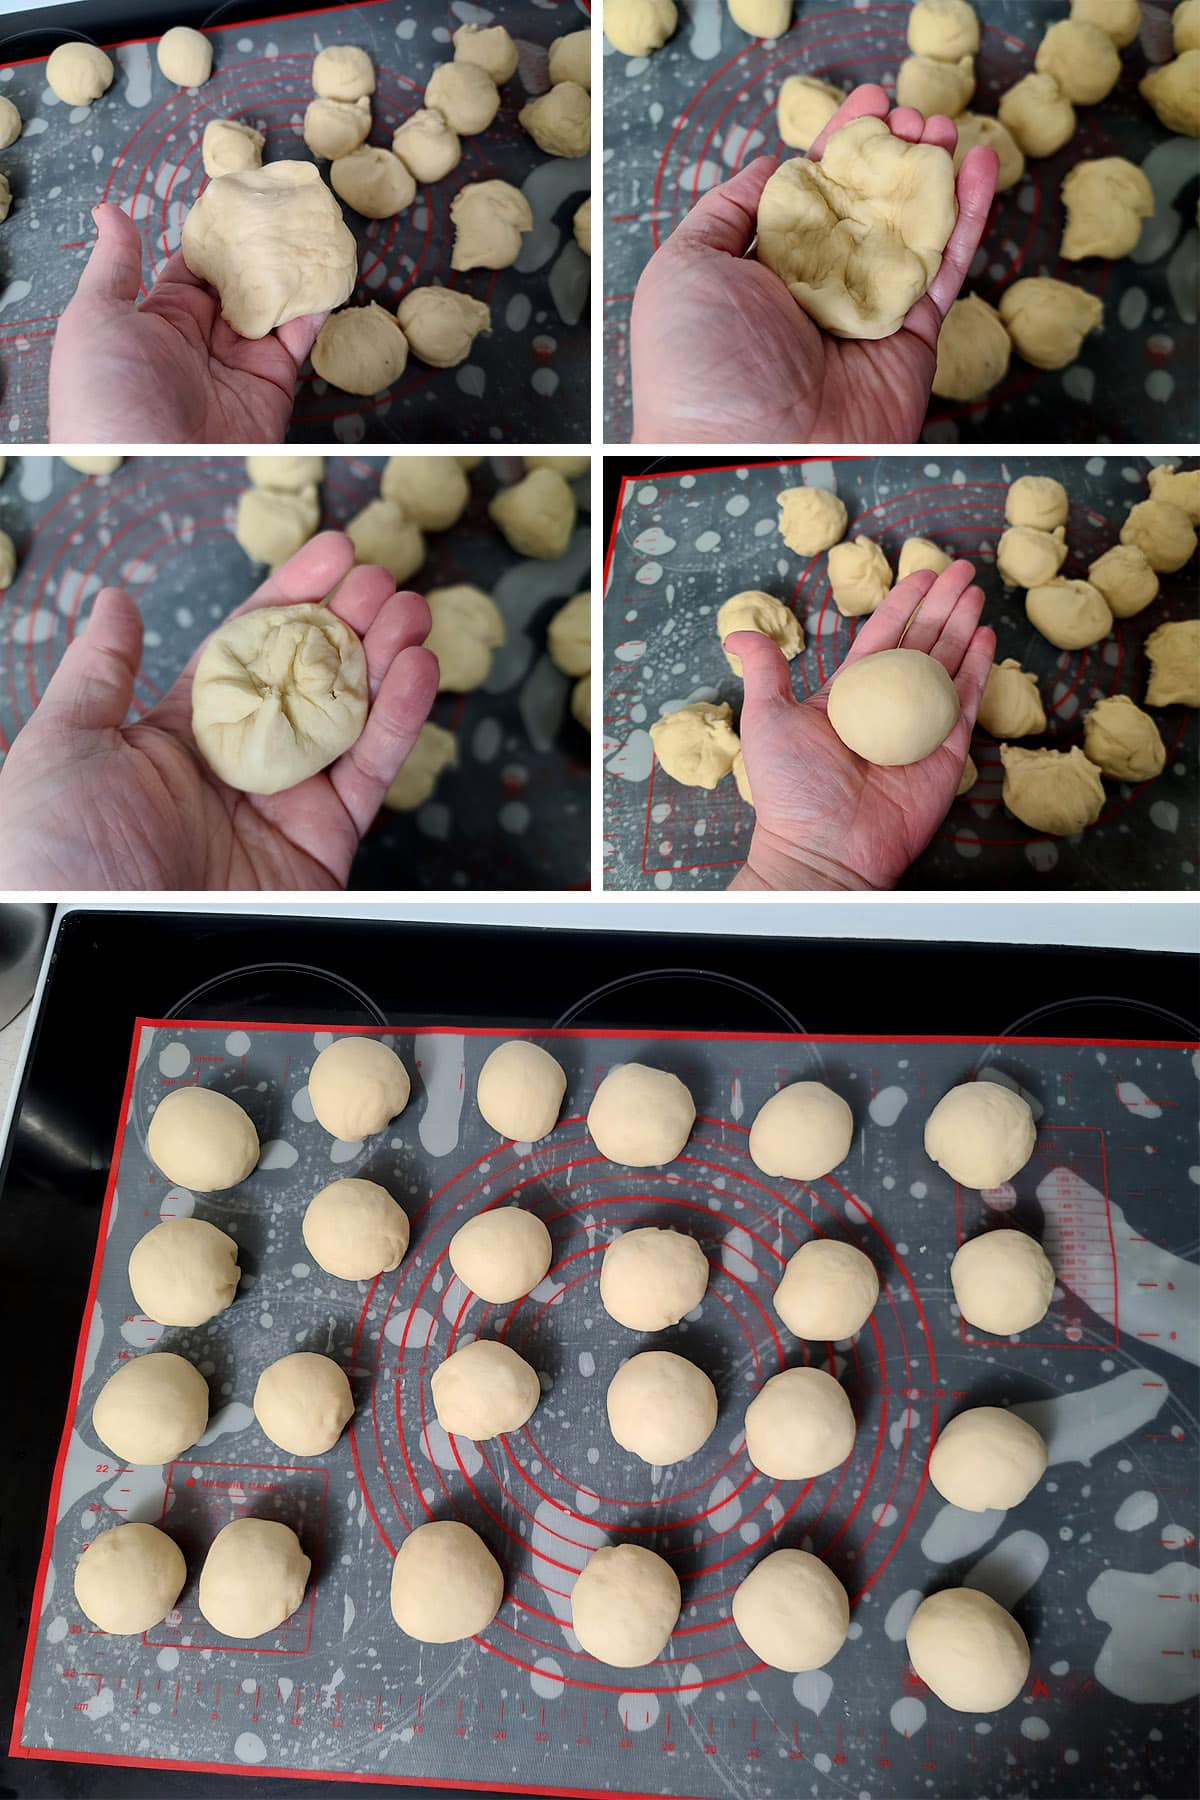 A 5 part image showing a pieces of dough being pulled and rolled into a smooth ball, and 24 smooth balls of dough.